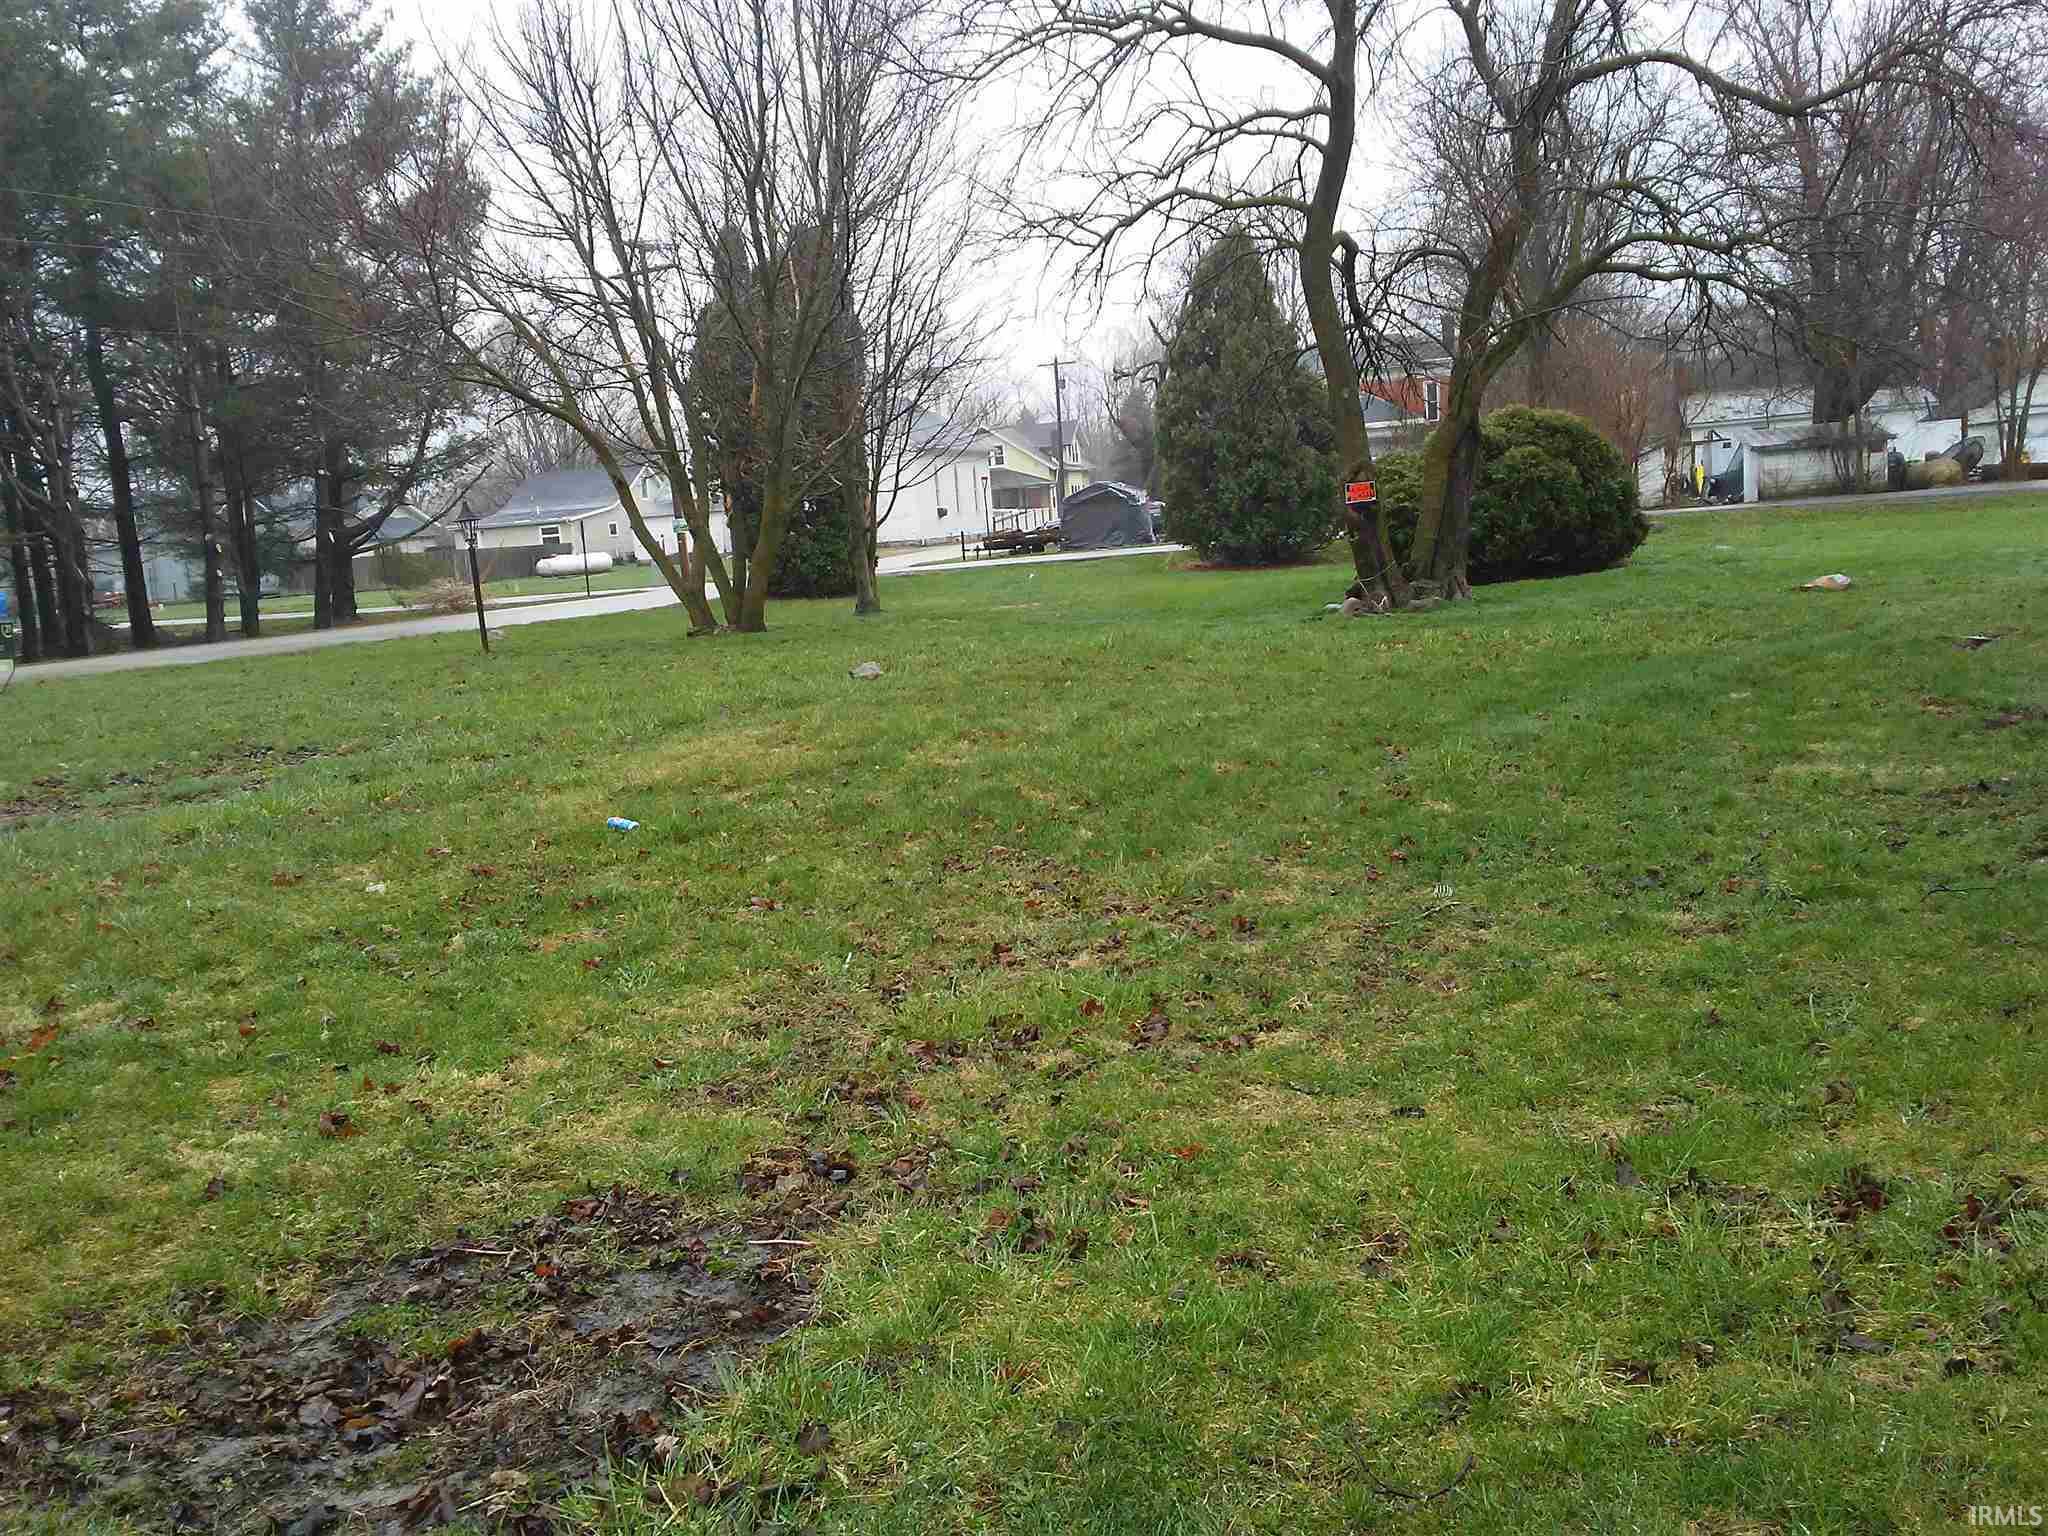 Here is a nice quarter acre lot located in Larwill ready for development.  Vacant lot to the East, paved alley to the South and Hammontree to the North.  The property has mature trees and shrubs and would be perfect and affordable to build a home, workshop, or a manufactured home.  City sewer line runs along the alley and is capped ready for hook-up.  A private well is needed.  Close to Highway 30 which is a convenient corridor between Warsaw, Columbia City, and Fort Wayne.  Variances will be the buyer's responsibility.